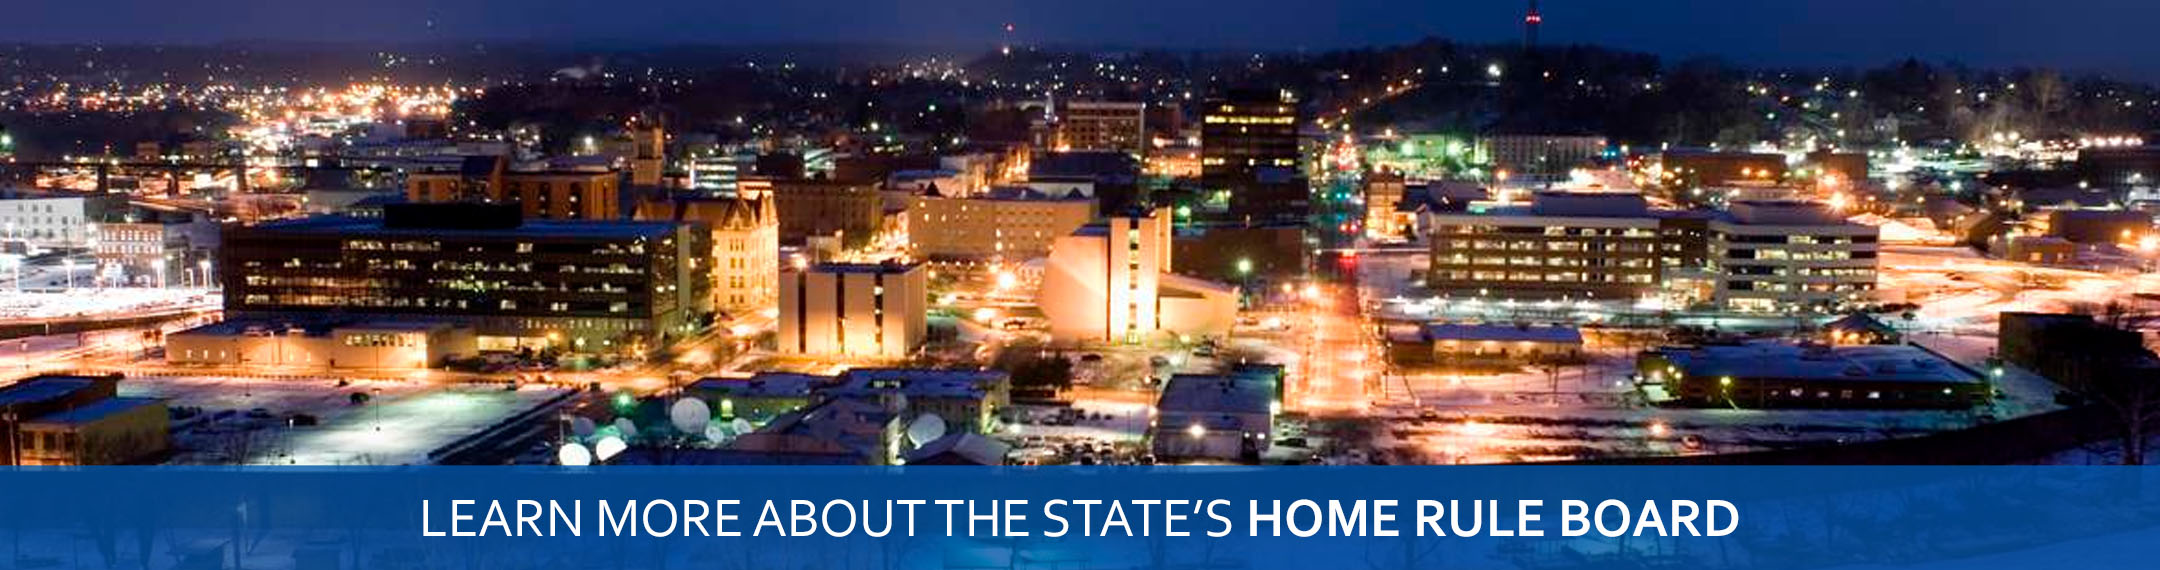 Learn more about the State's Home Rule Board